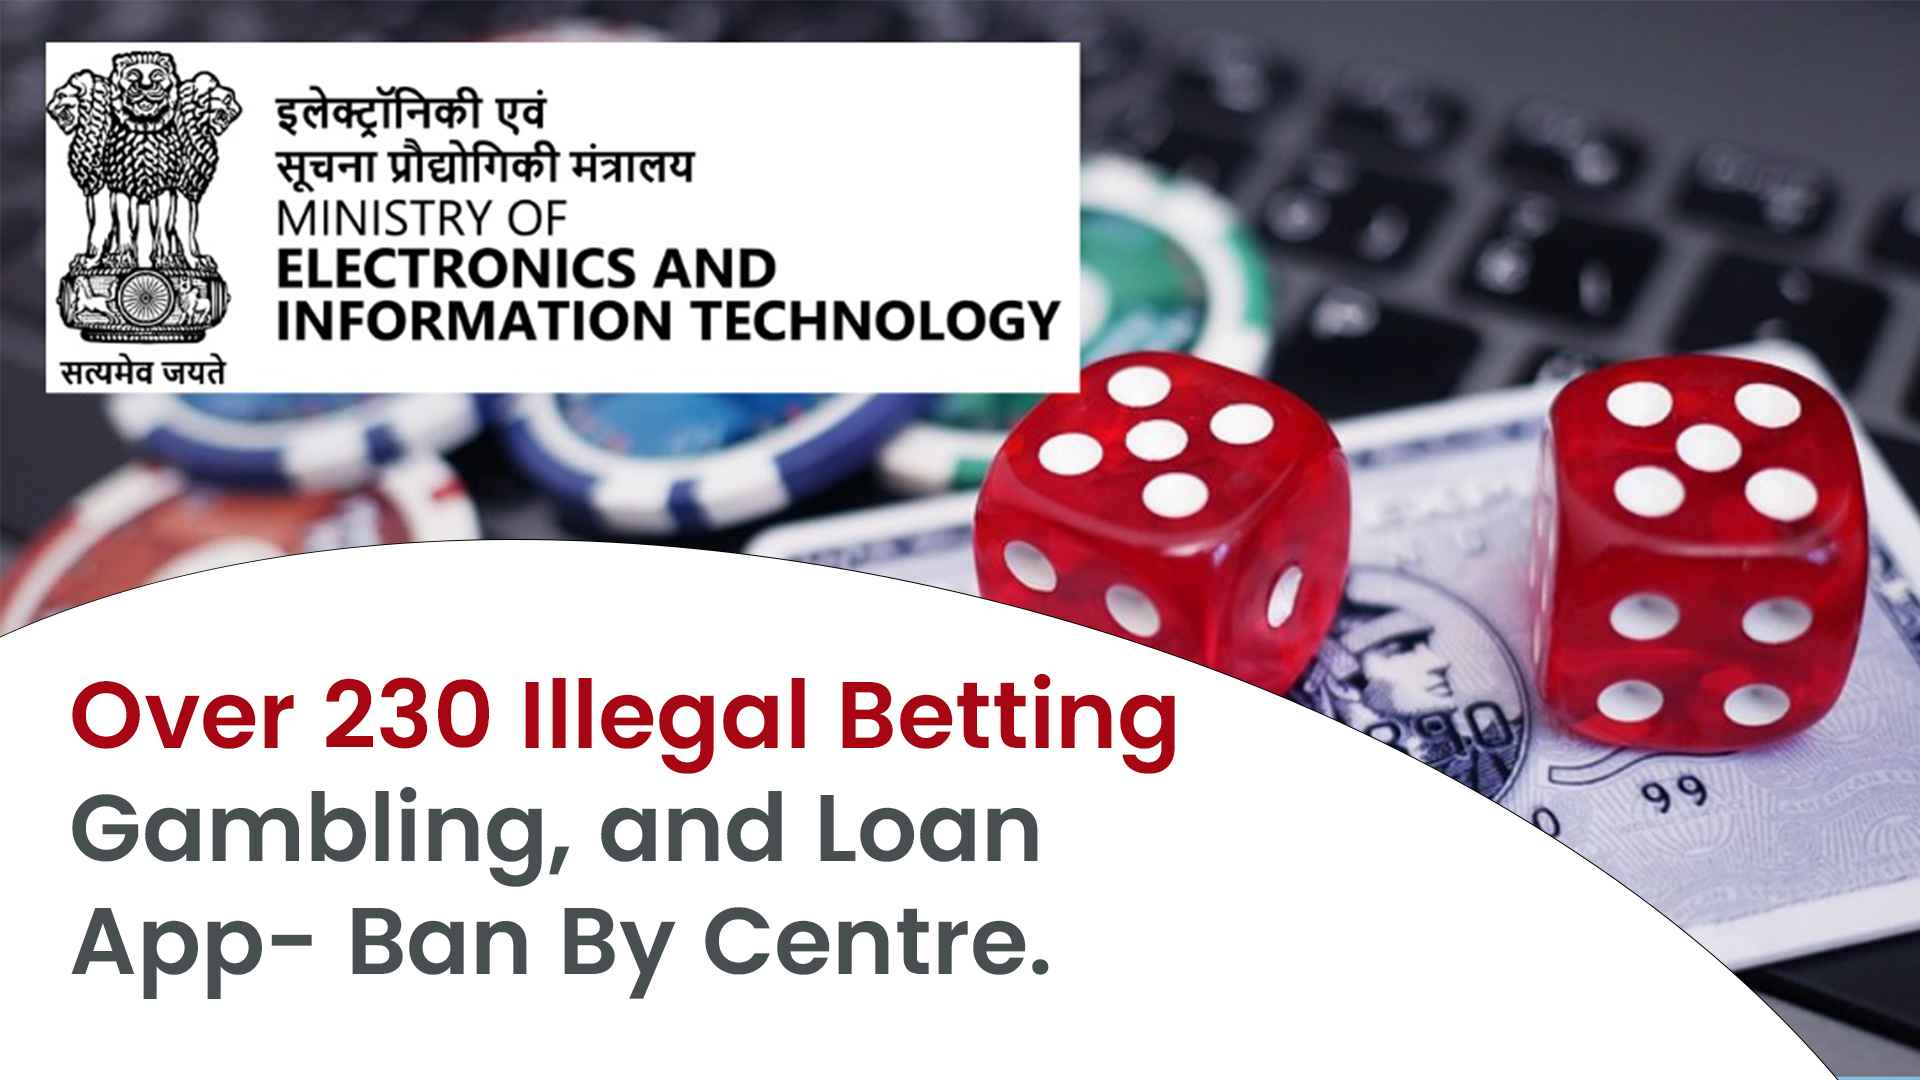 Over 230 Illegal Betting, Gambling, and Loan App- Ban By Centre. 02_11zon